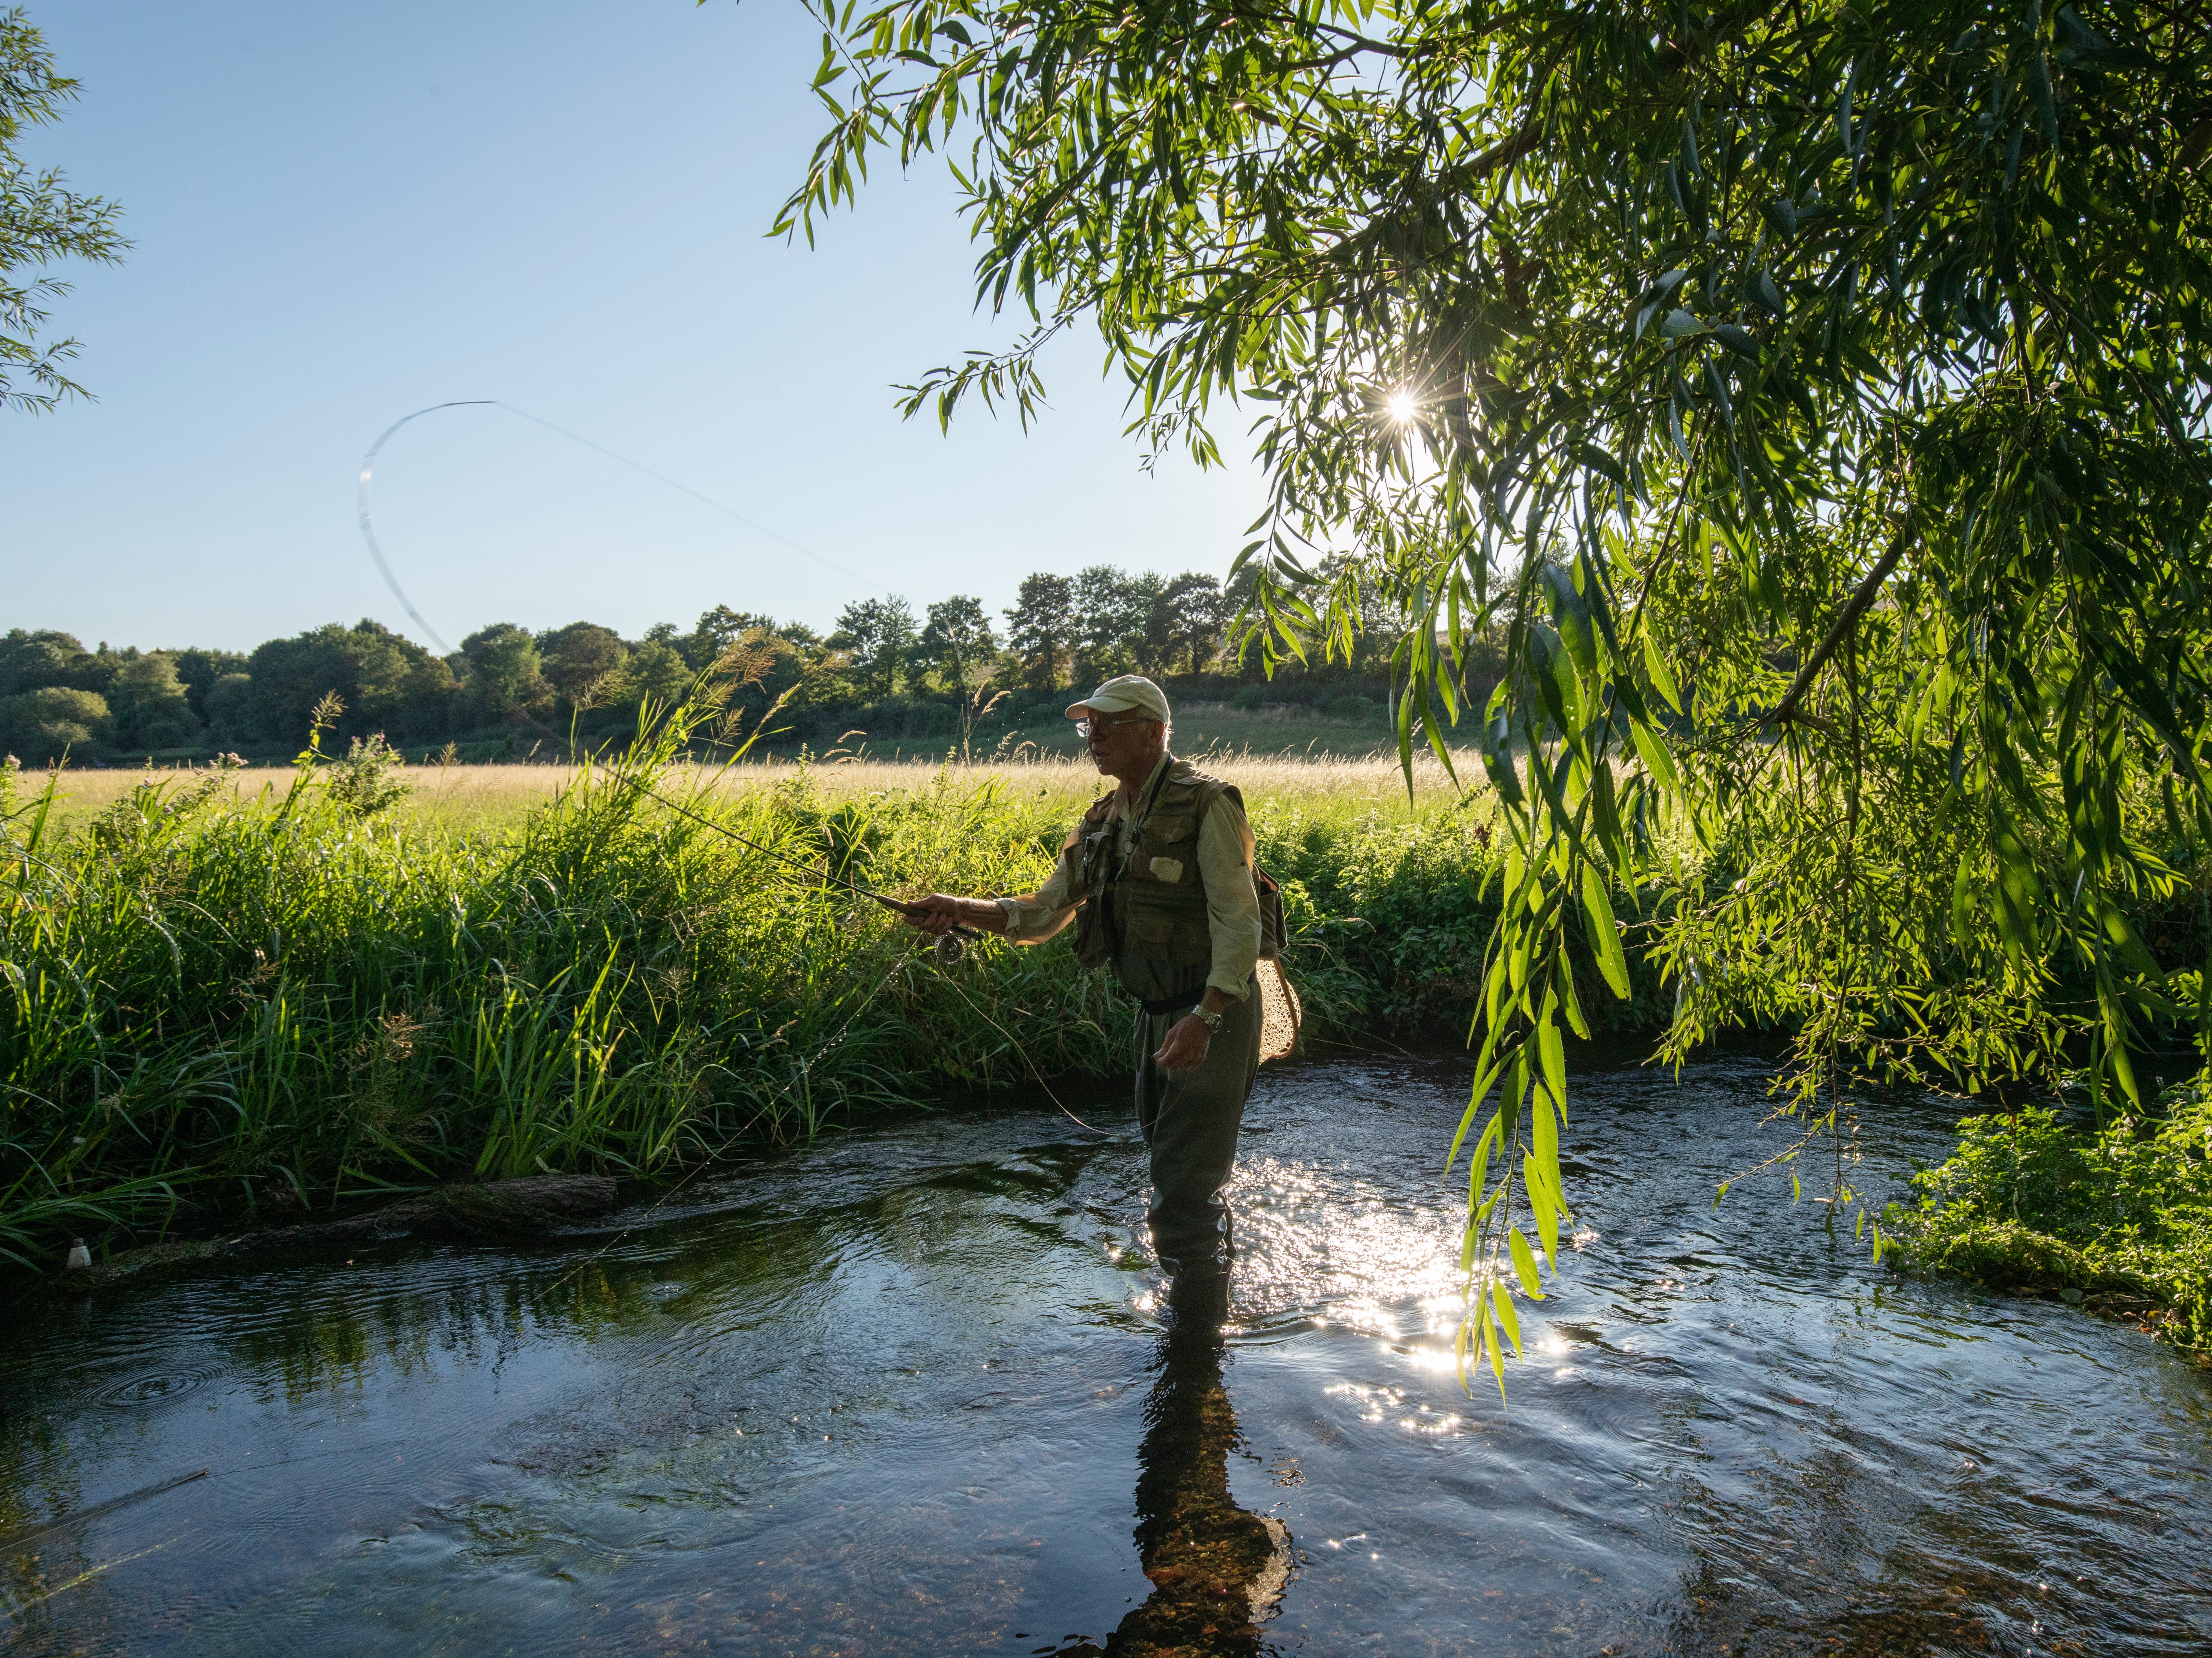 A fly fisherman in the river Darent